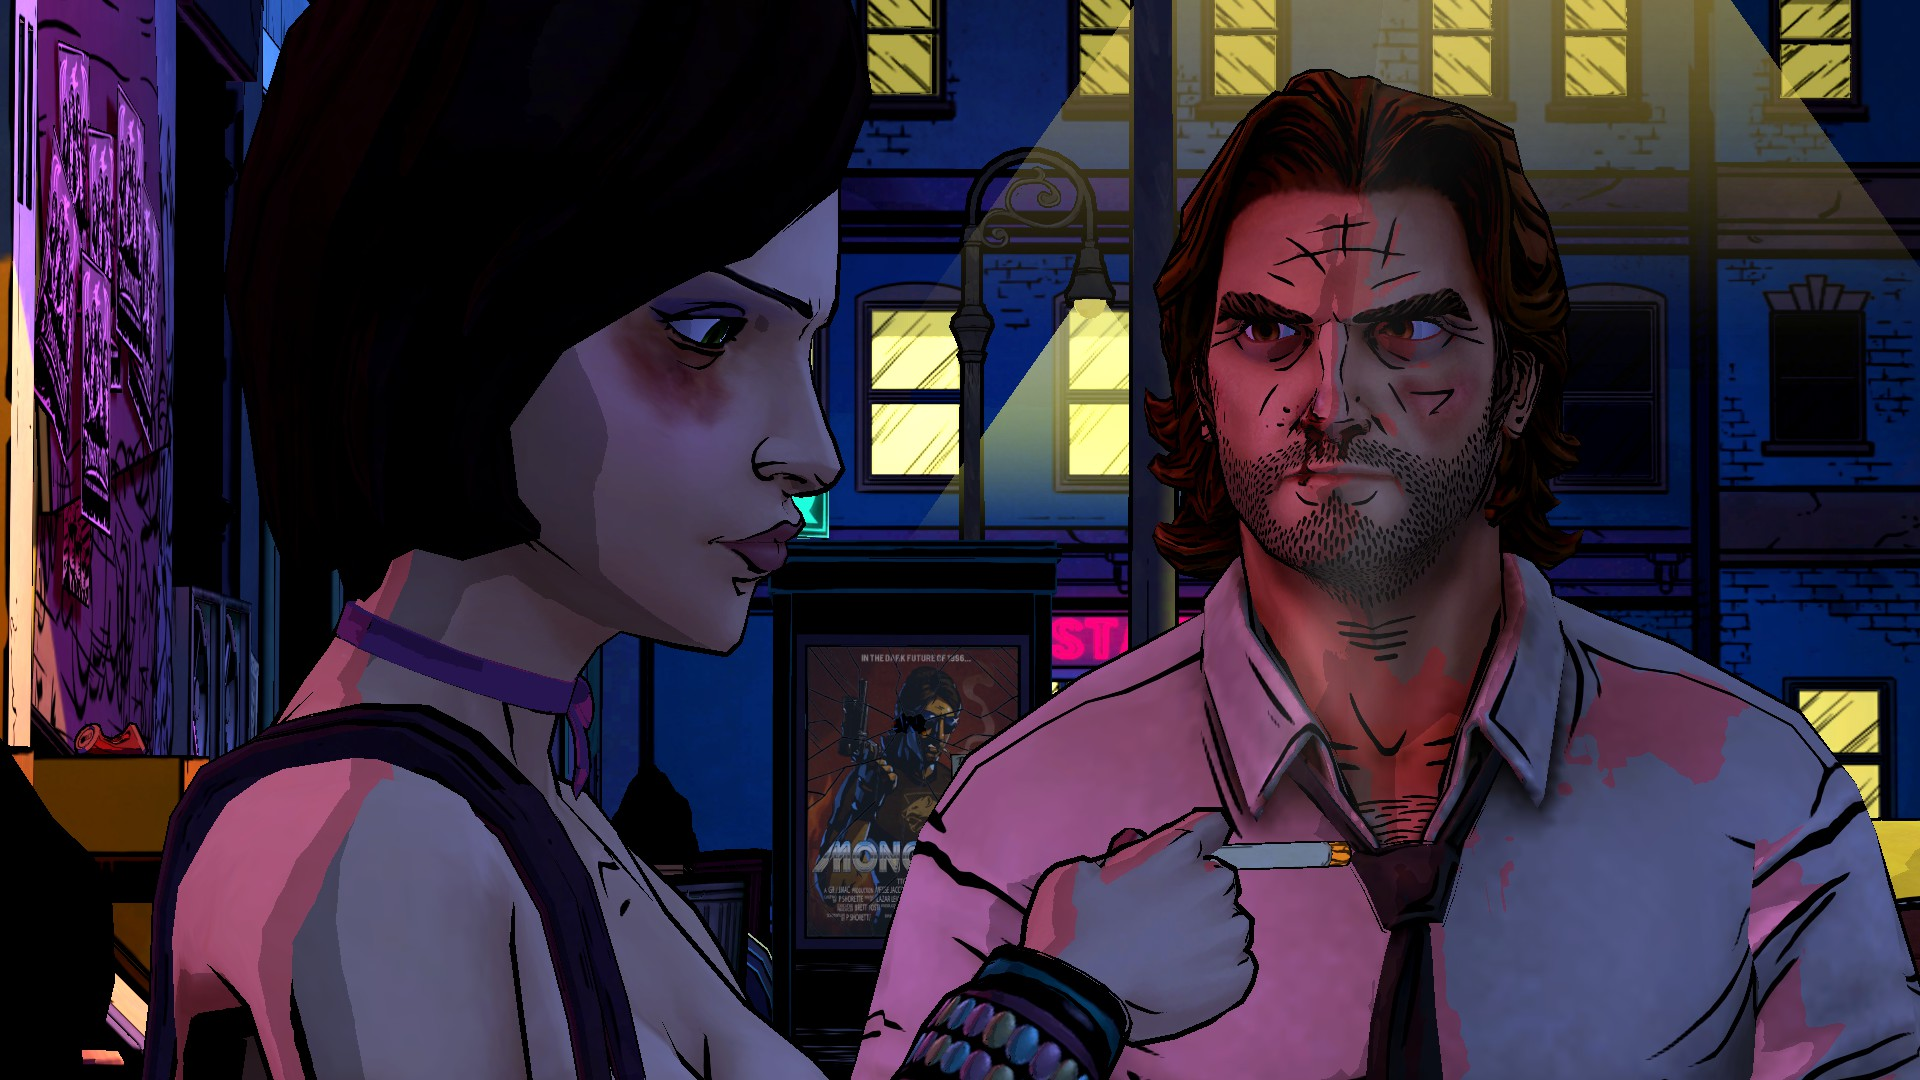 instal the last version for ios The Wolf Among Us